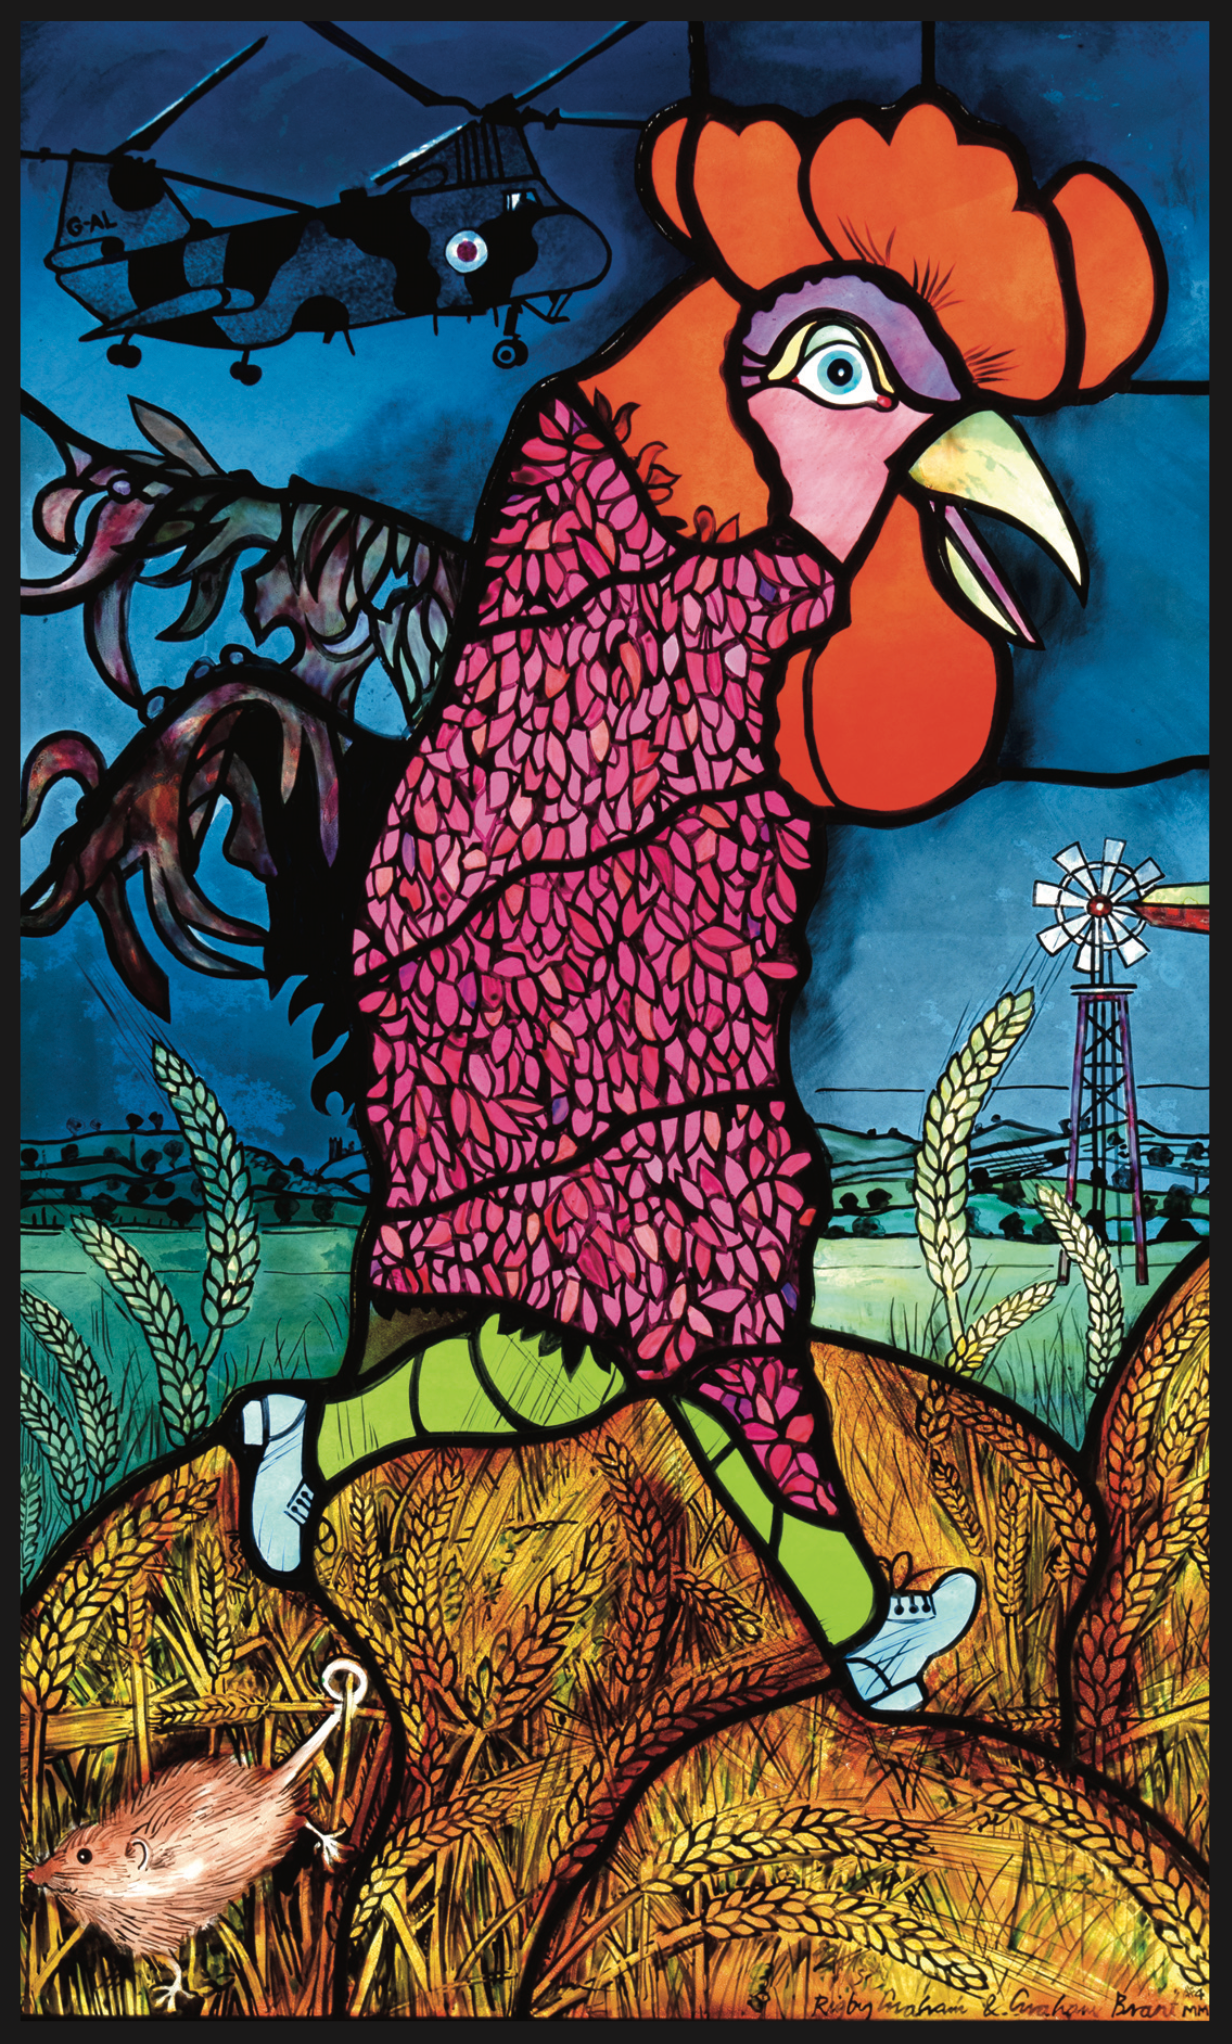 Clare’s Cockerel, stained glass, ed 3, 2001